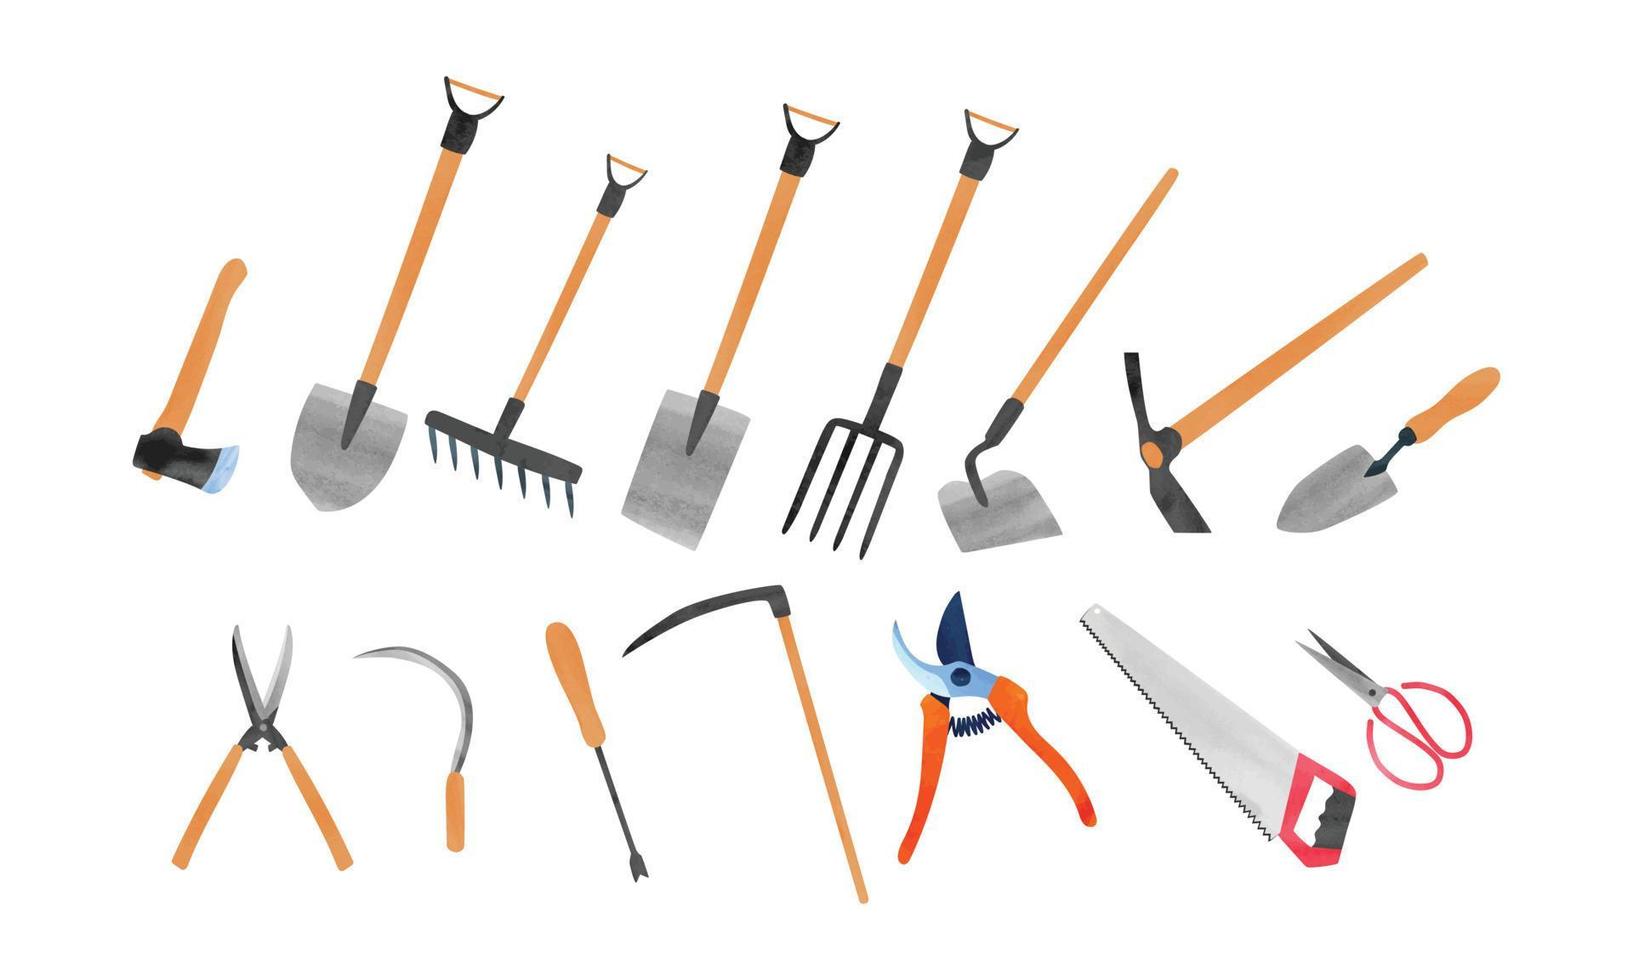 Gardening tools set watercolor illustration isolated on white background. Garden items clipart bundle. Axe, shovel, spade, rake, pitchfork, hoe, mattock, trowel, sickle, scythe, pruning saw, pruners vector